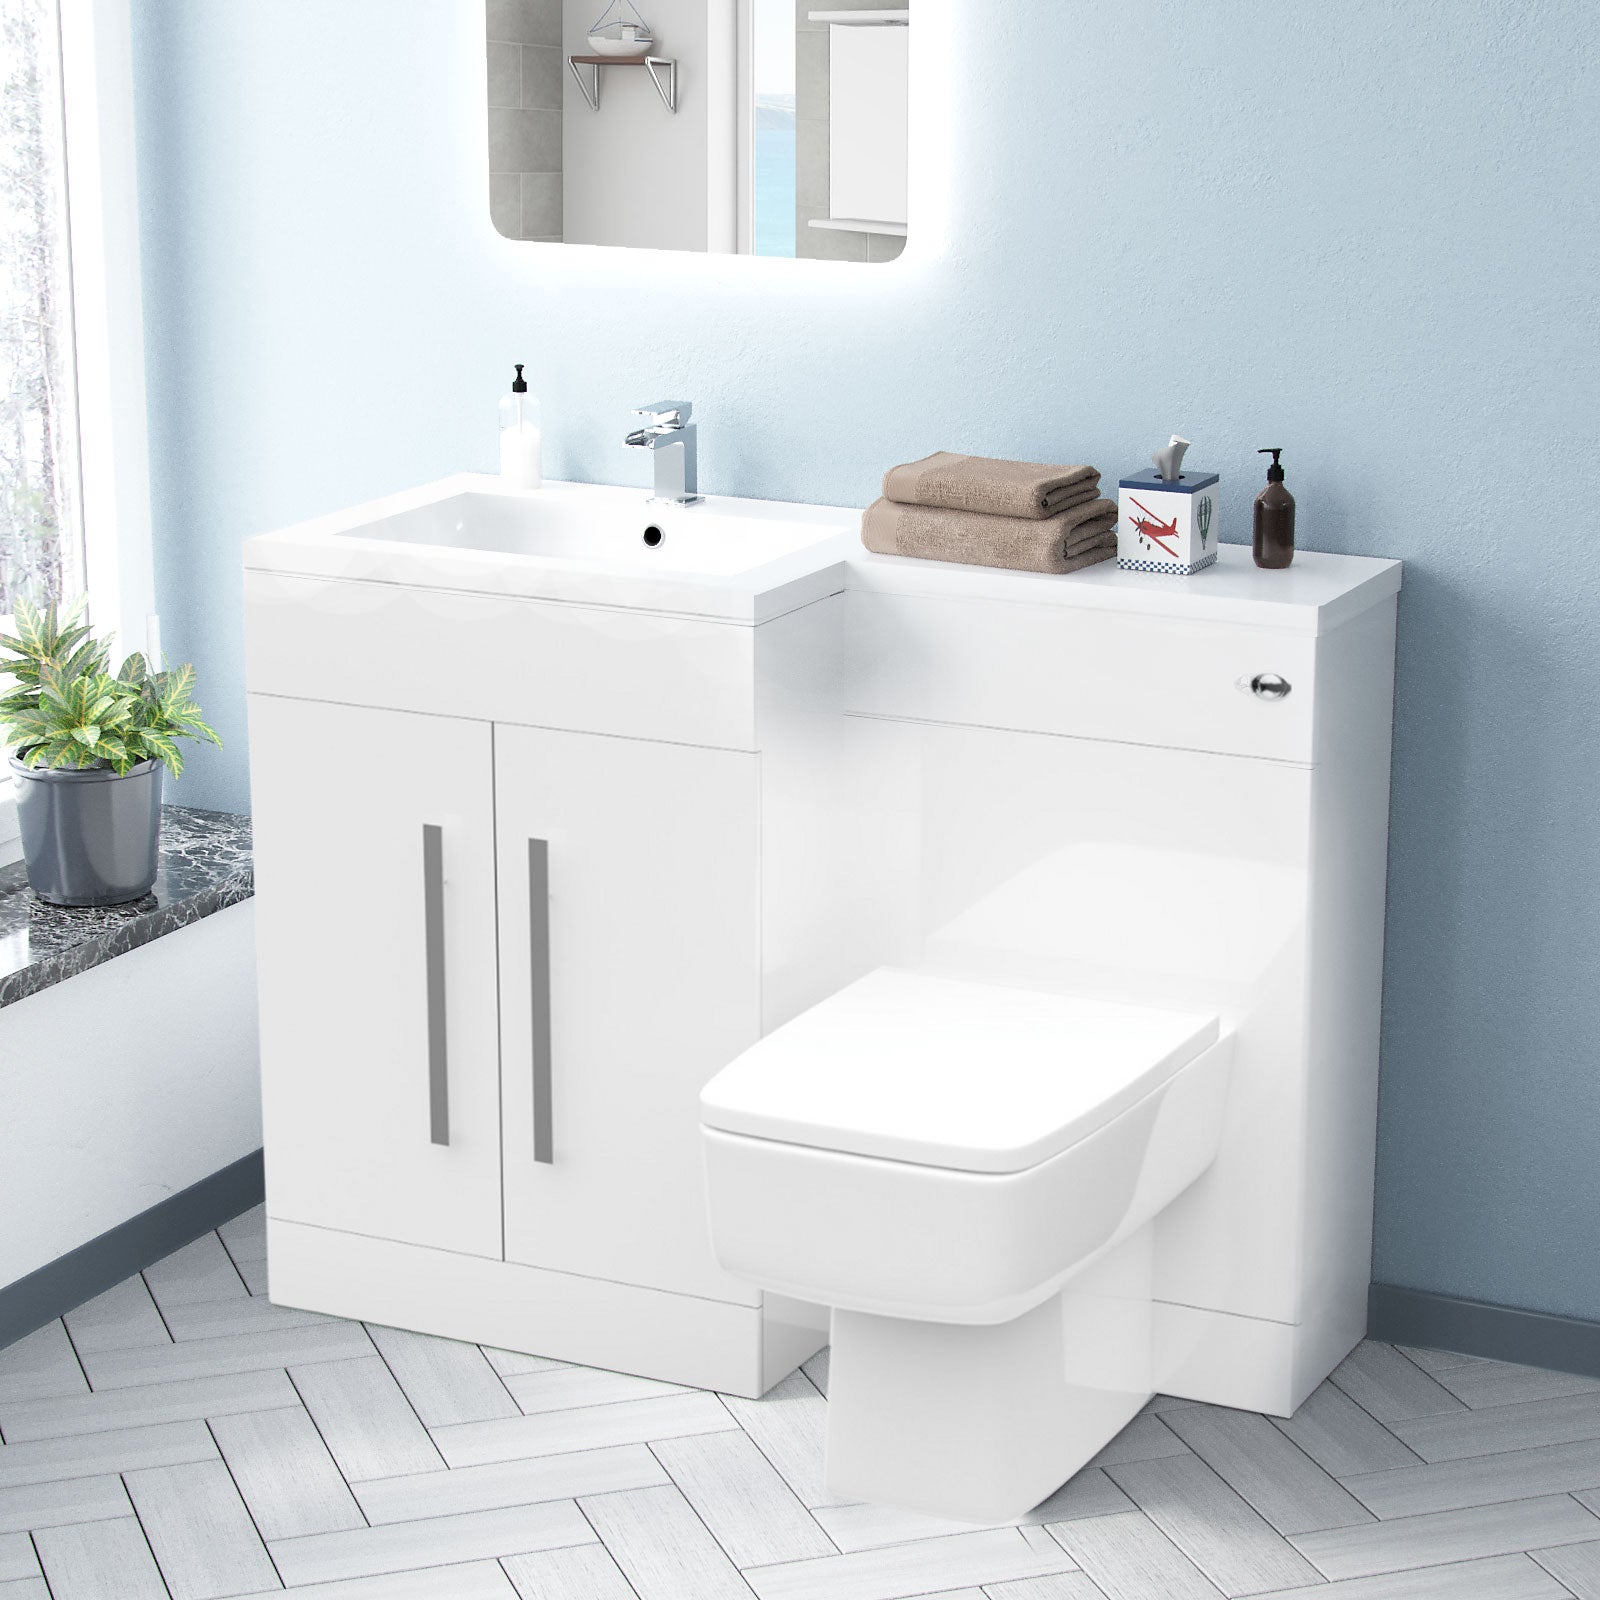 Aric 1100mm Freestanding White Basin Vanity Unit with WC Unit & BTW Toilet